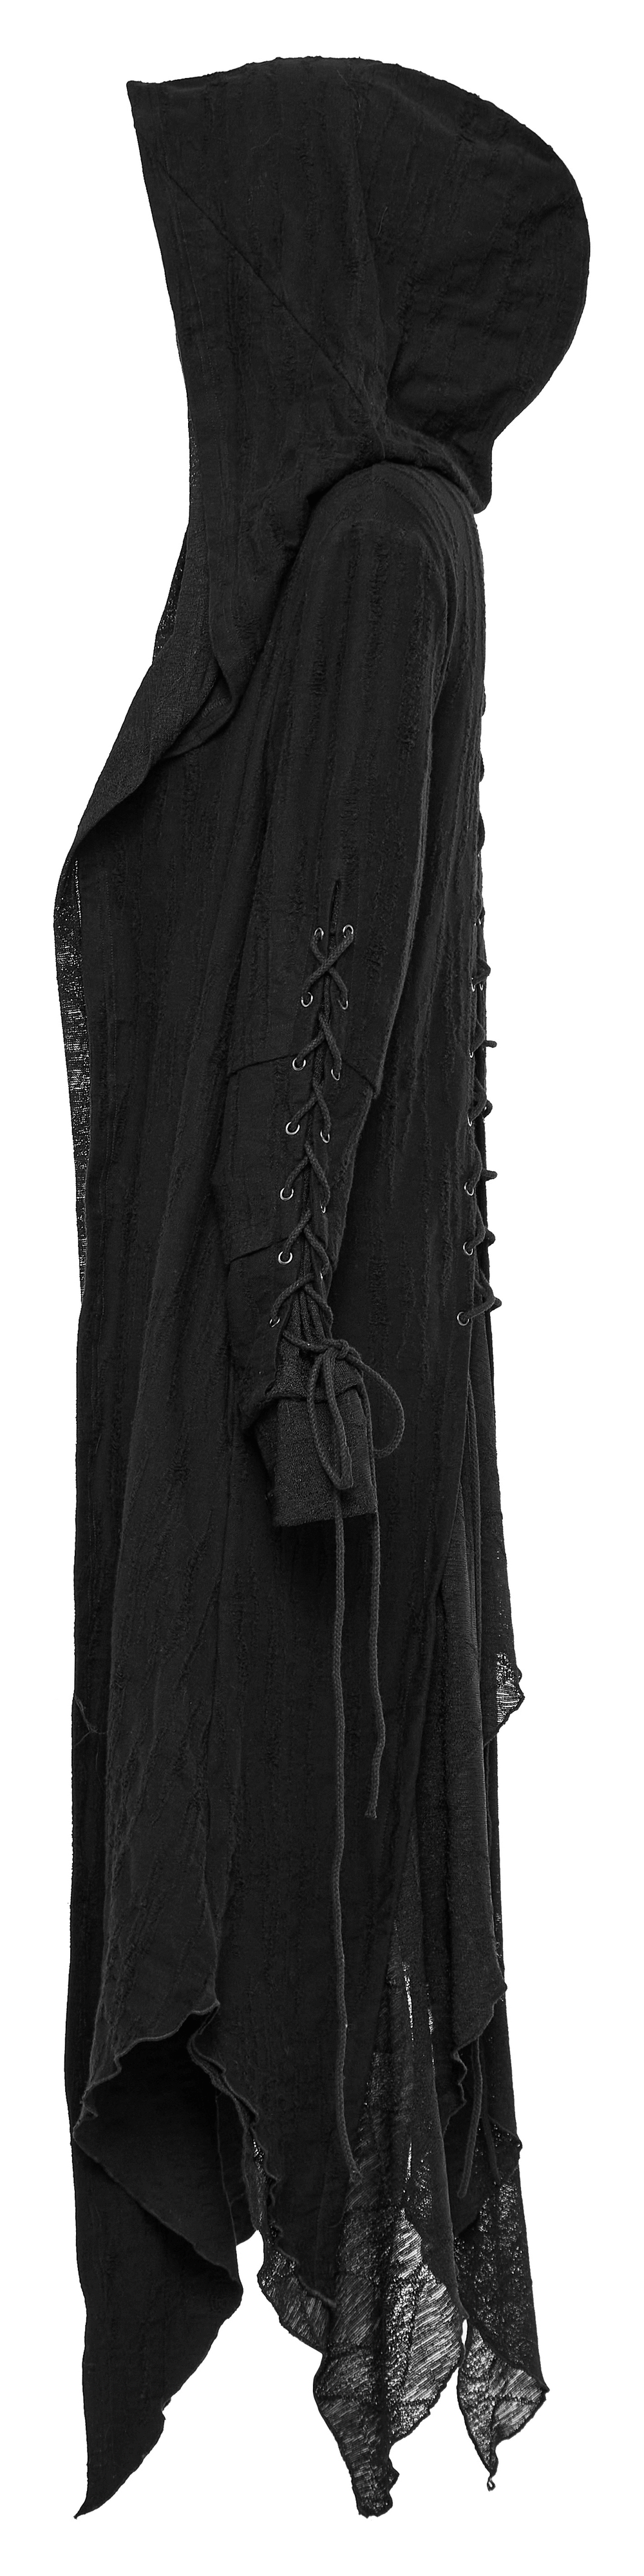 Chic Black Hooded Gothic Long Coat for Edgy Style - HARD'N'HEAVY